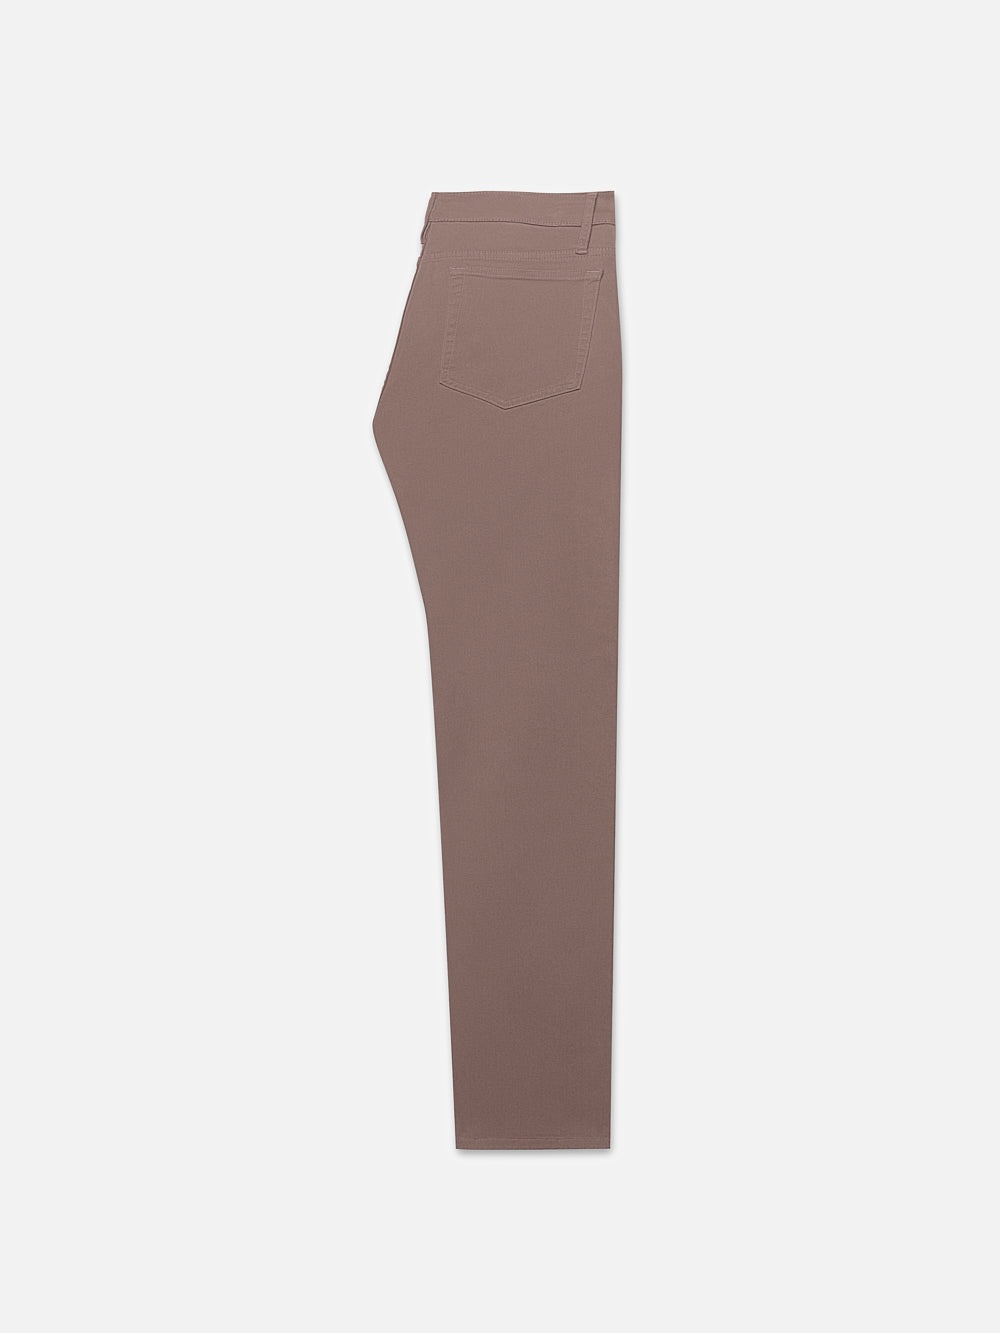 L'Homme Slim Brushed Twill in Dry Rose - 3